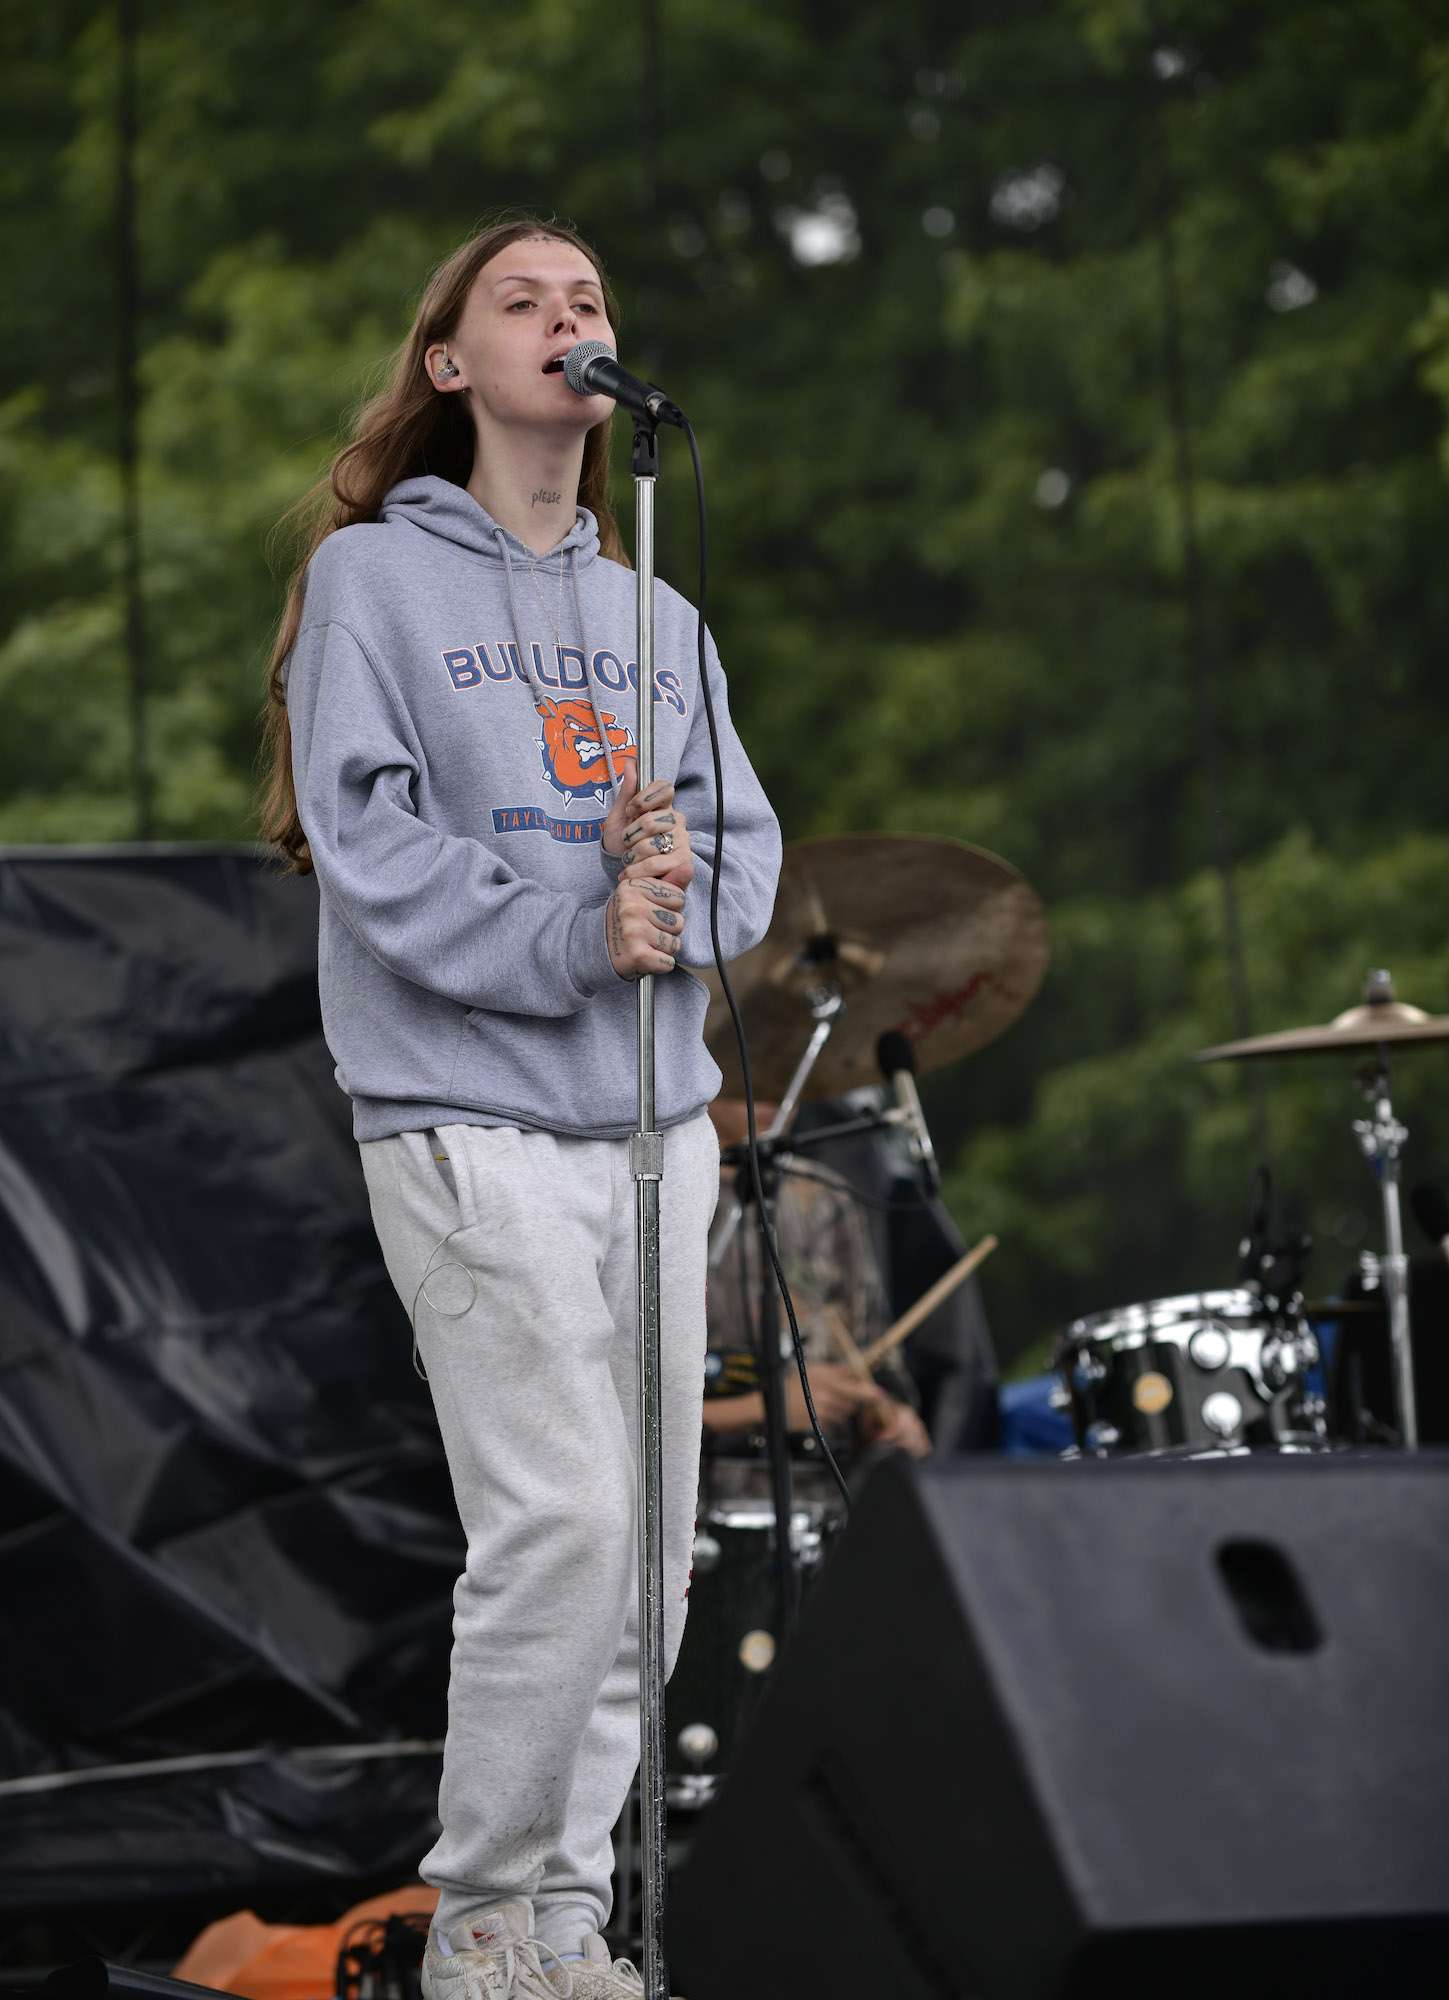 Ethel Cain Live At Pitchfork [GALLERY] 7